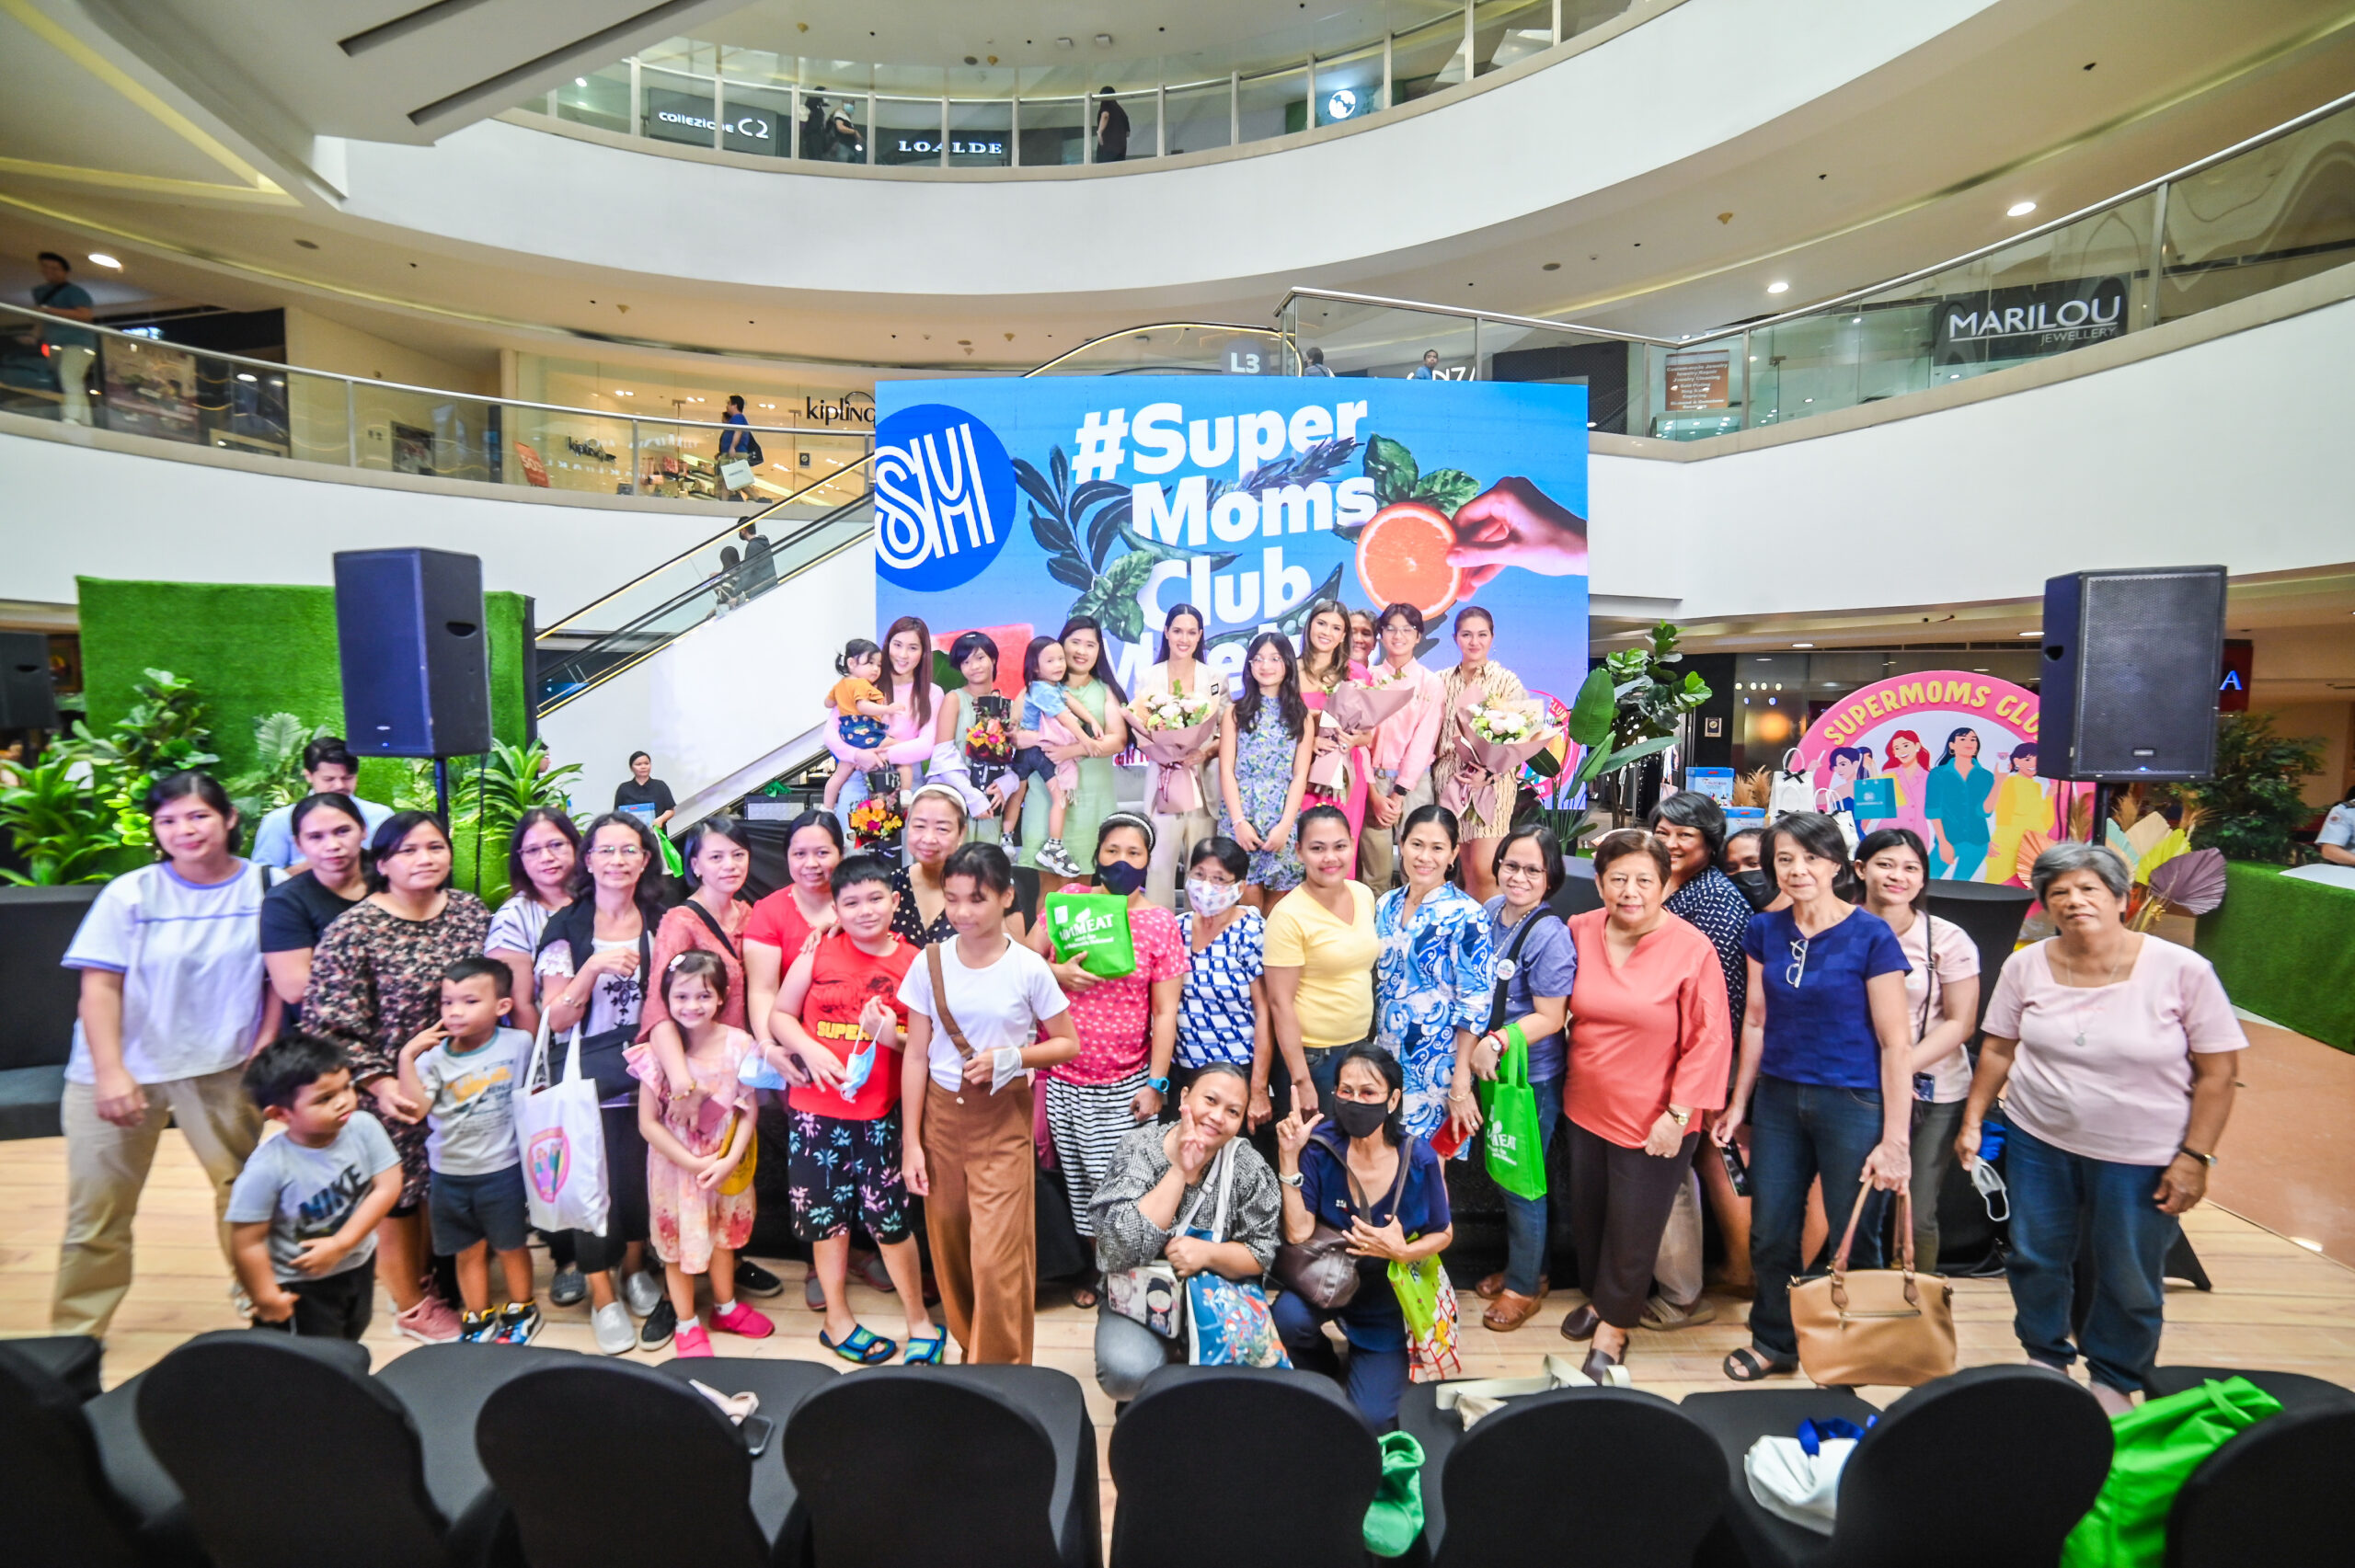 SM Supermalls and Mesa ni Misis Partner for Healthiest SuperMoms Meetup